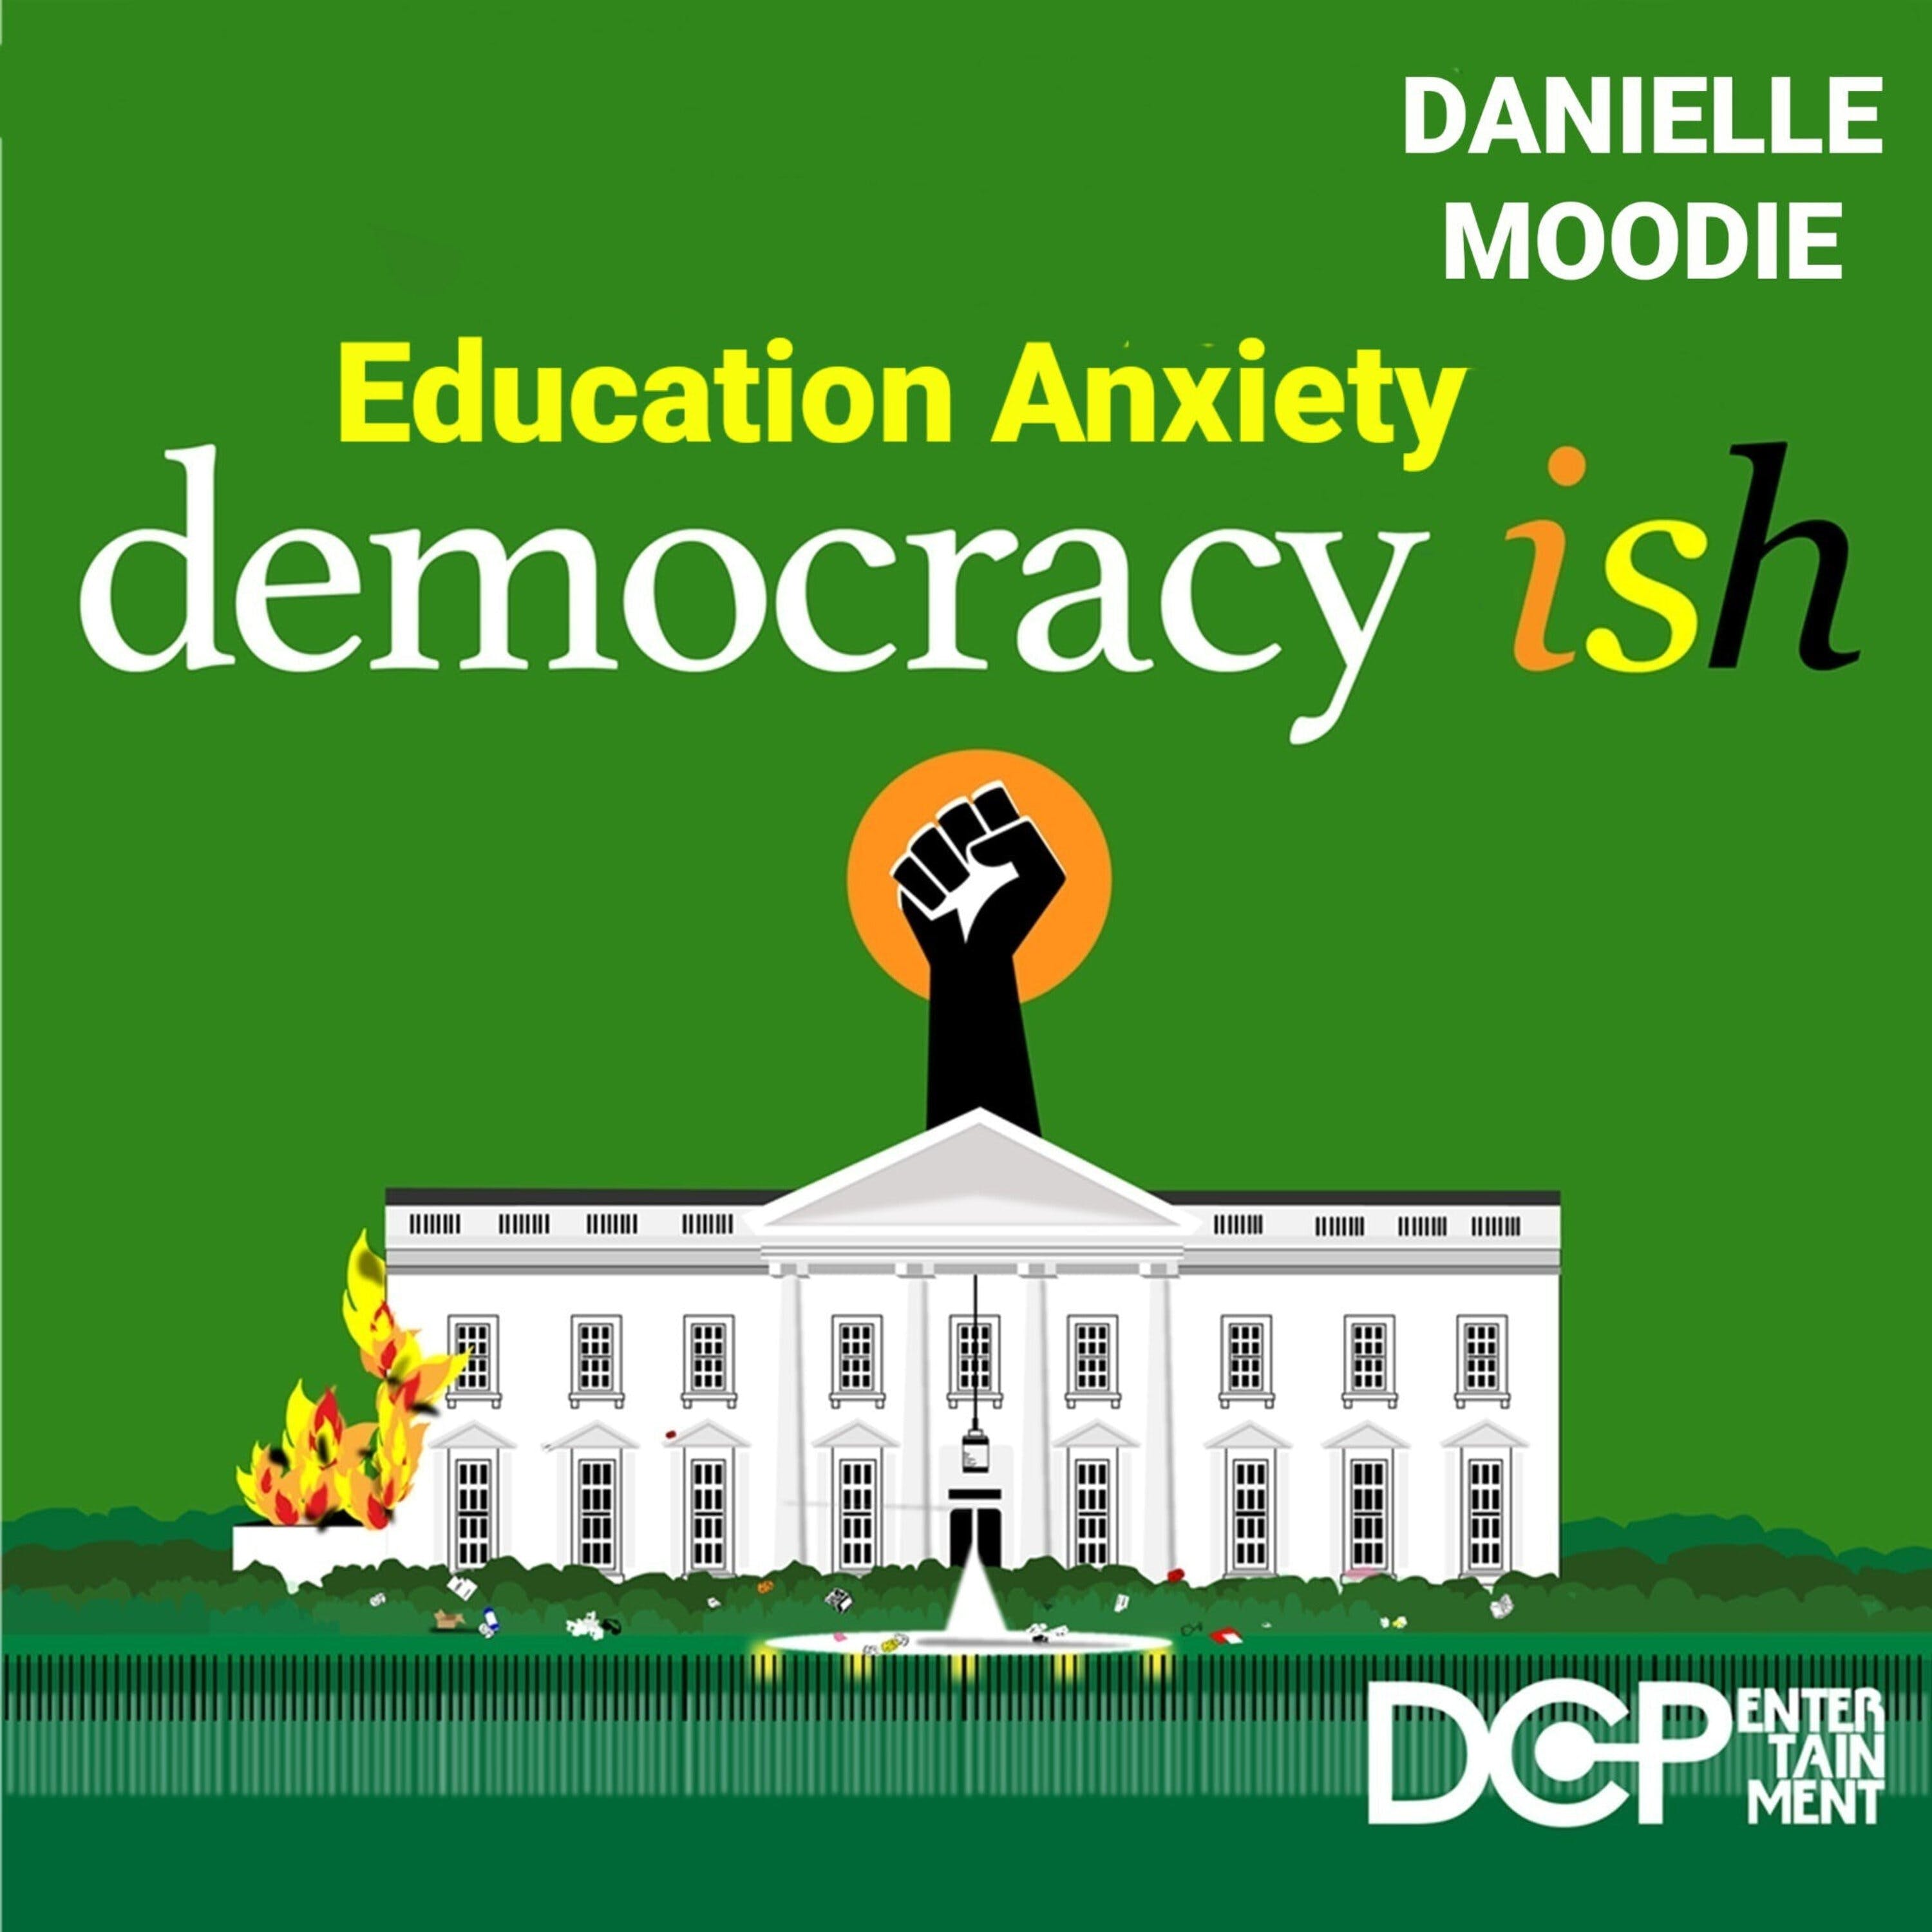 Education Anxiety?!